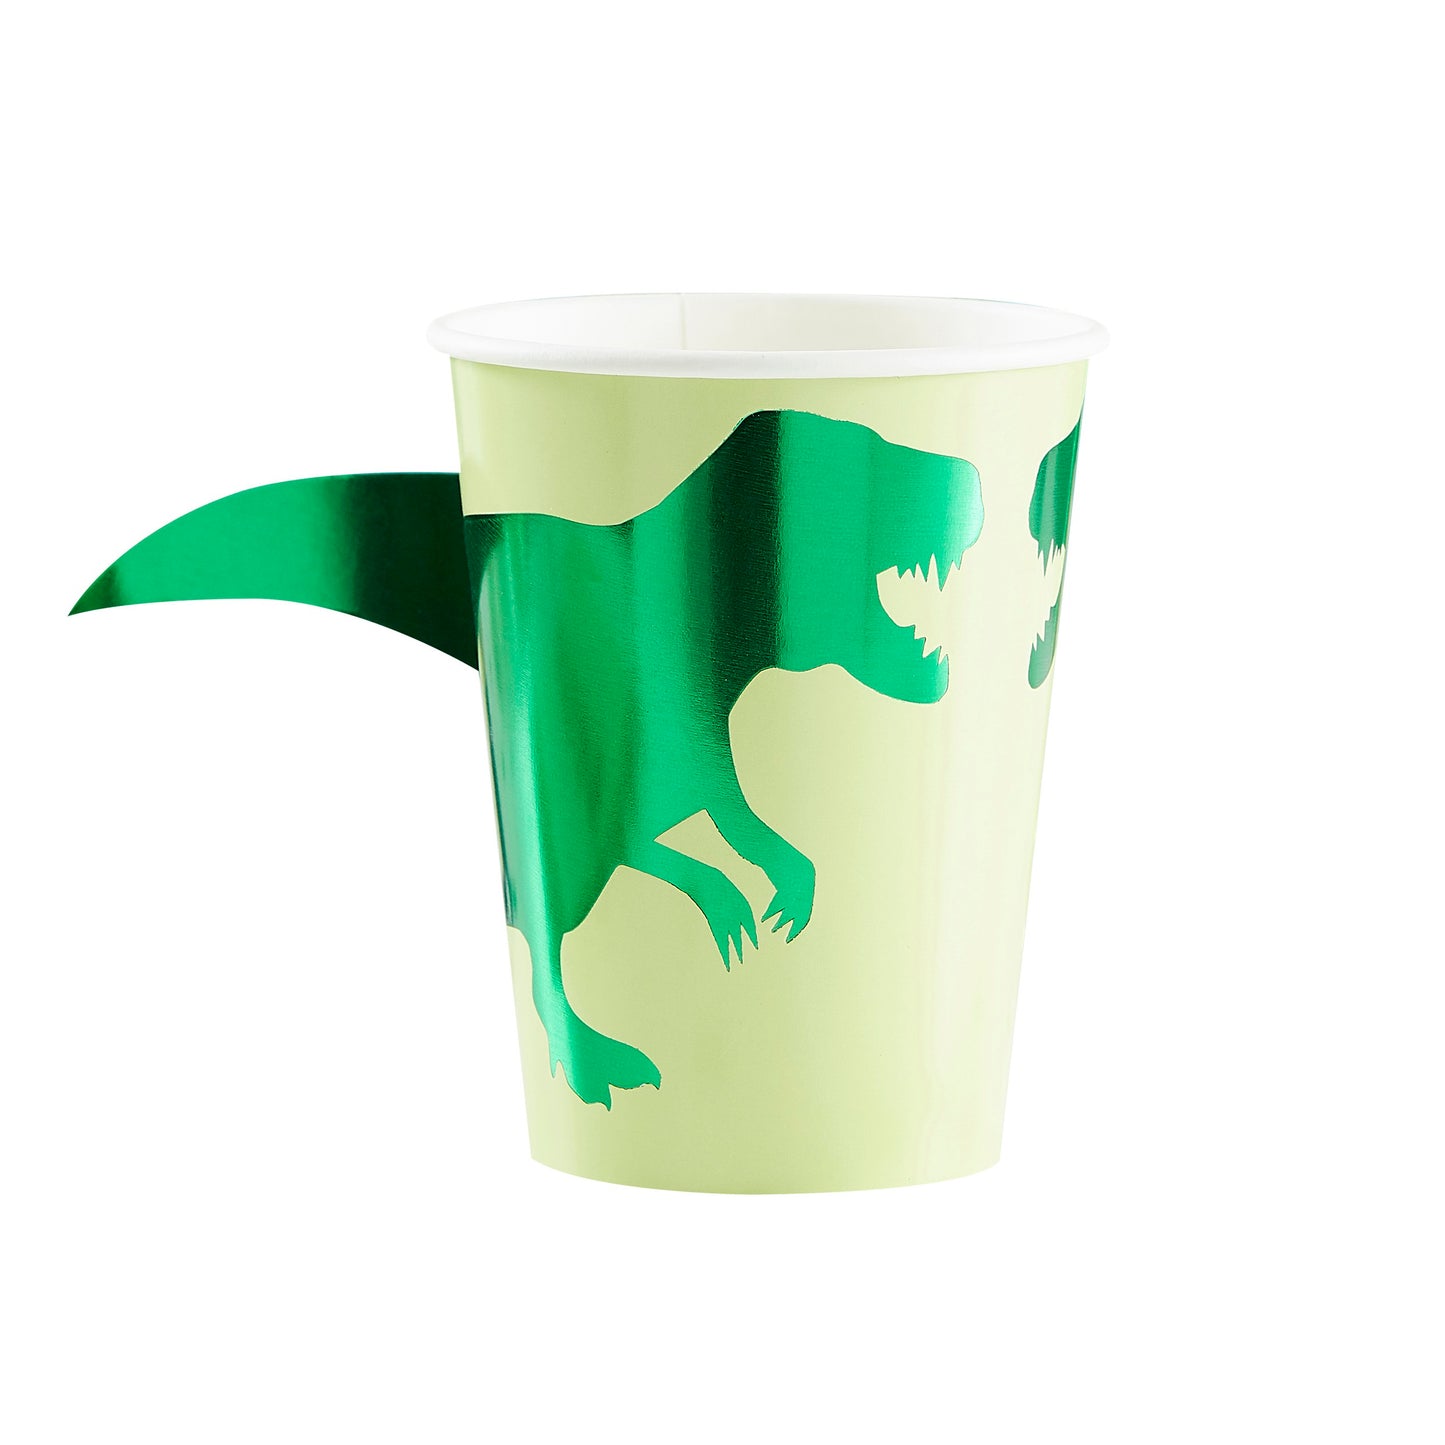 Paper Dinosaur Cups - Muddy Boots Home UK